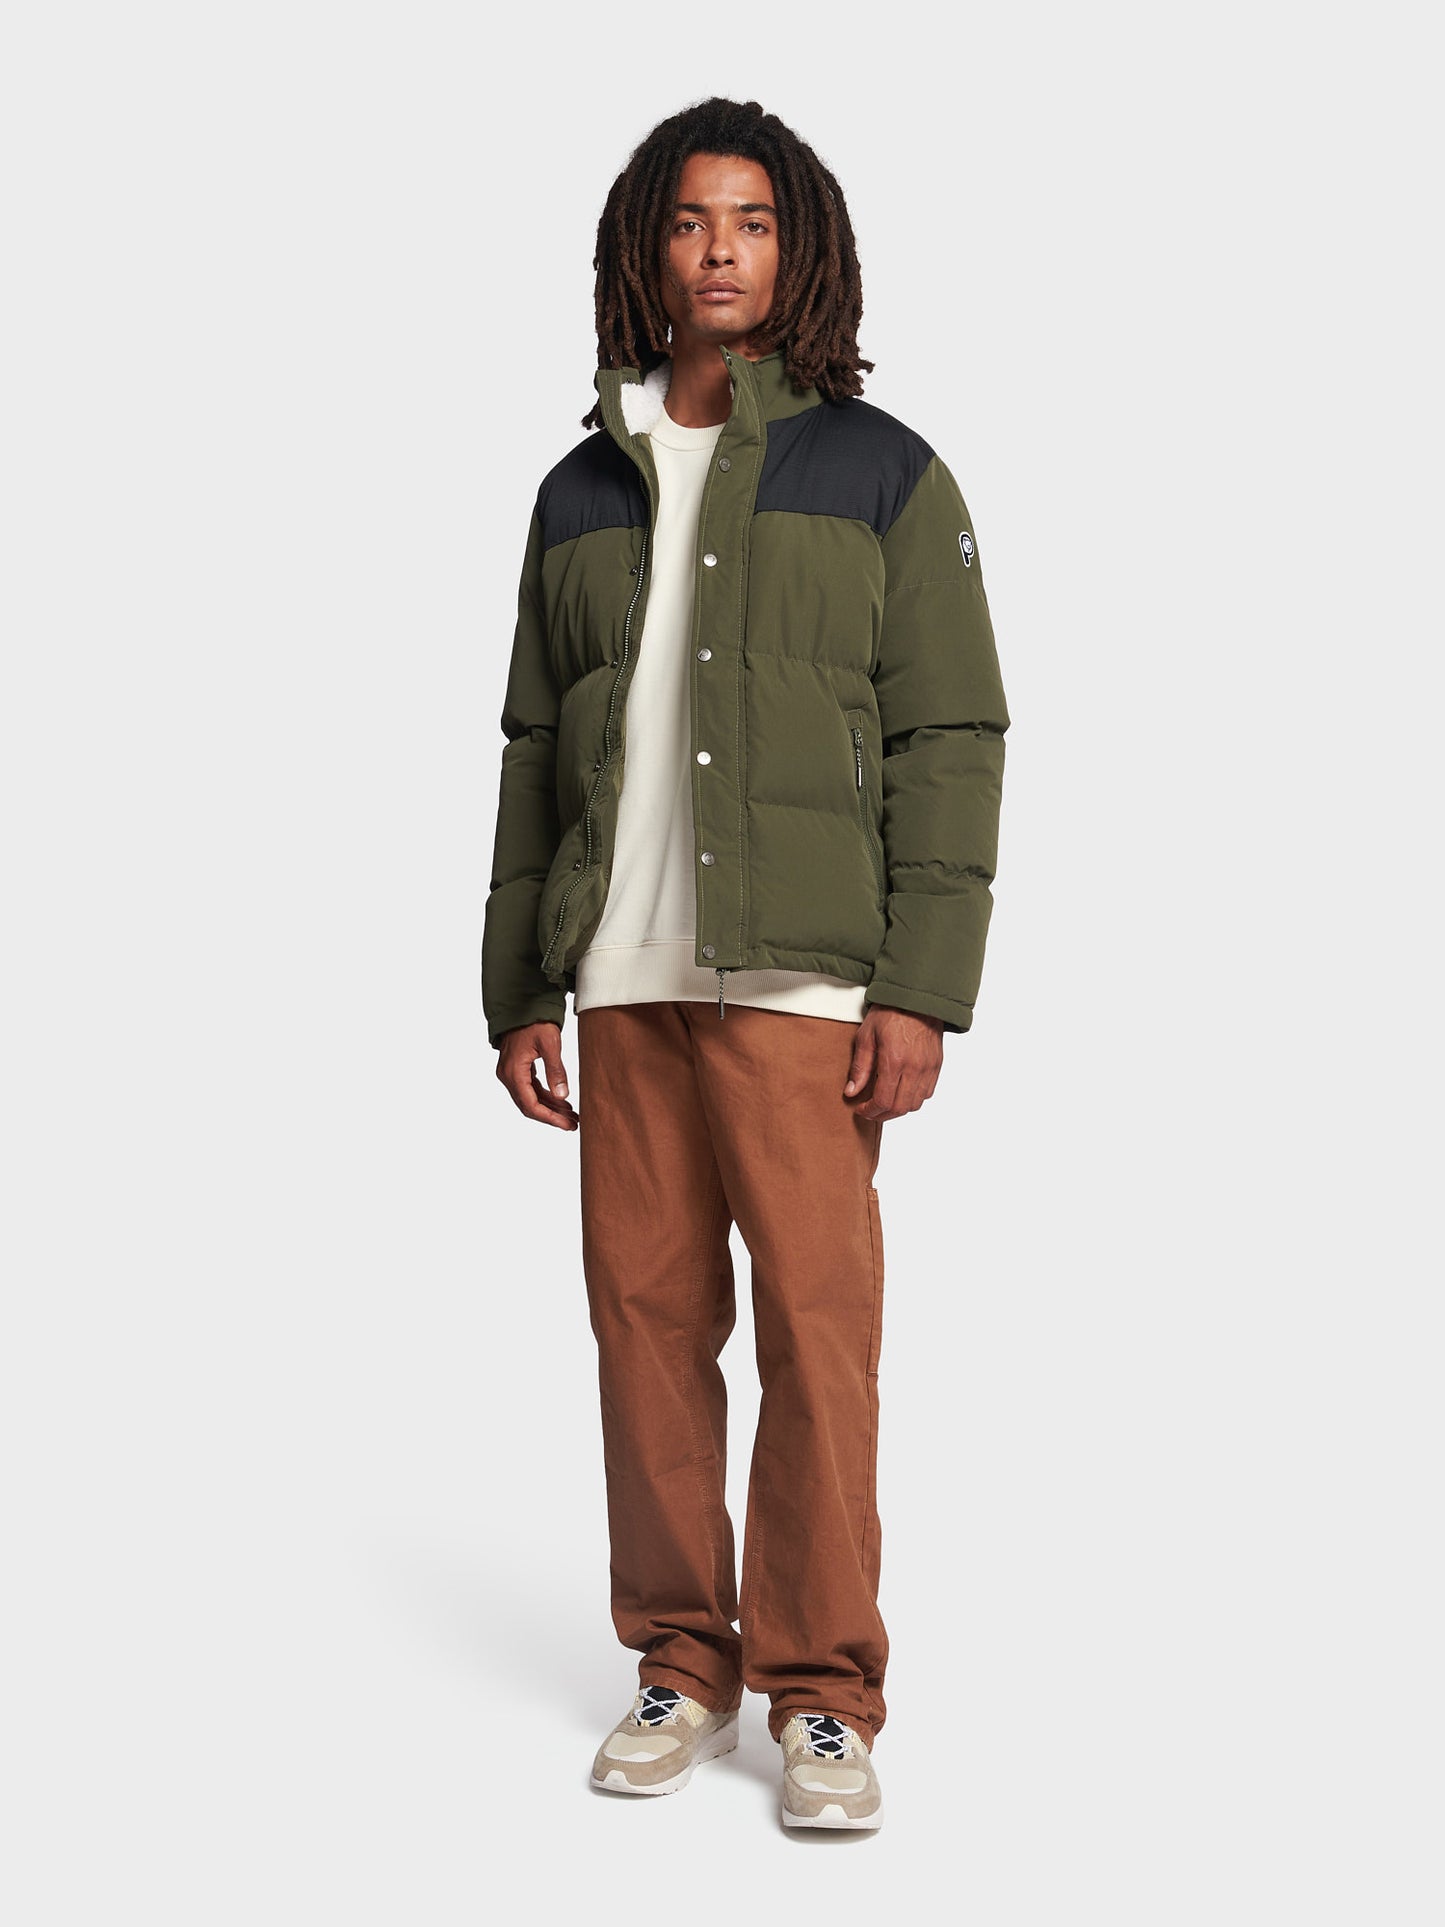 P Bear Cut + Sew Funnel Neck Puffer Jacket in Forest Night